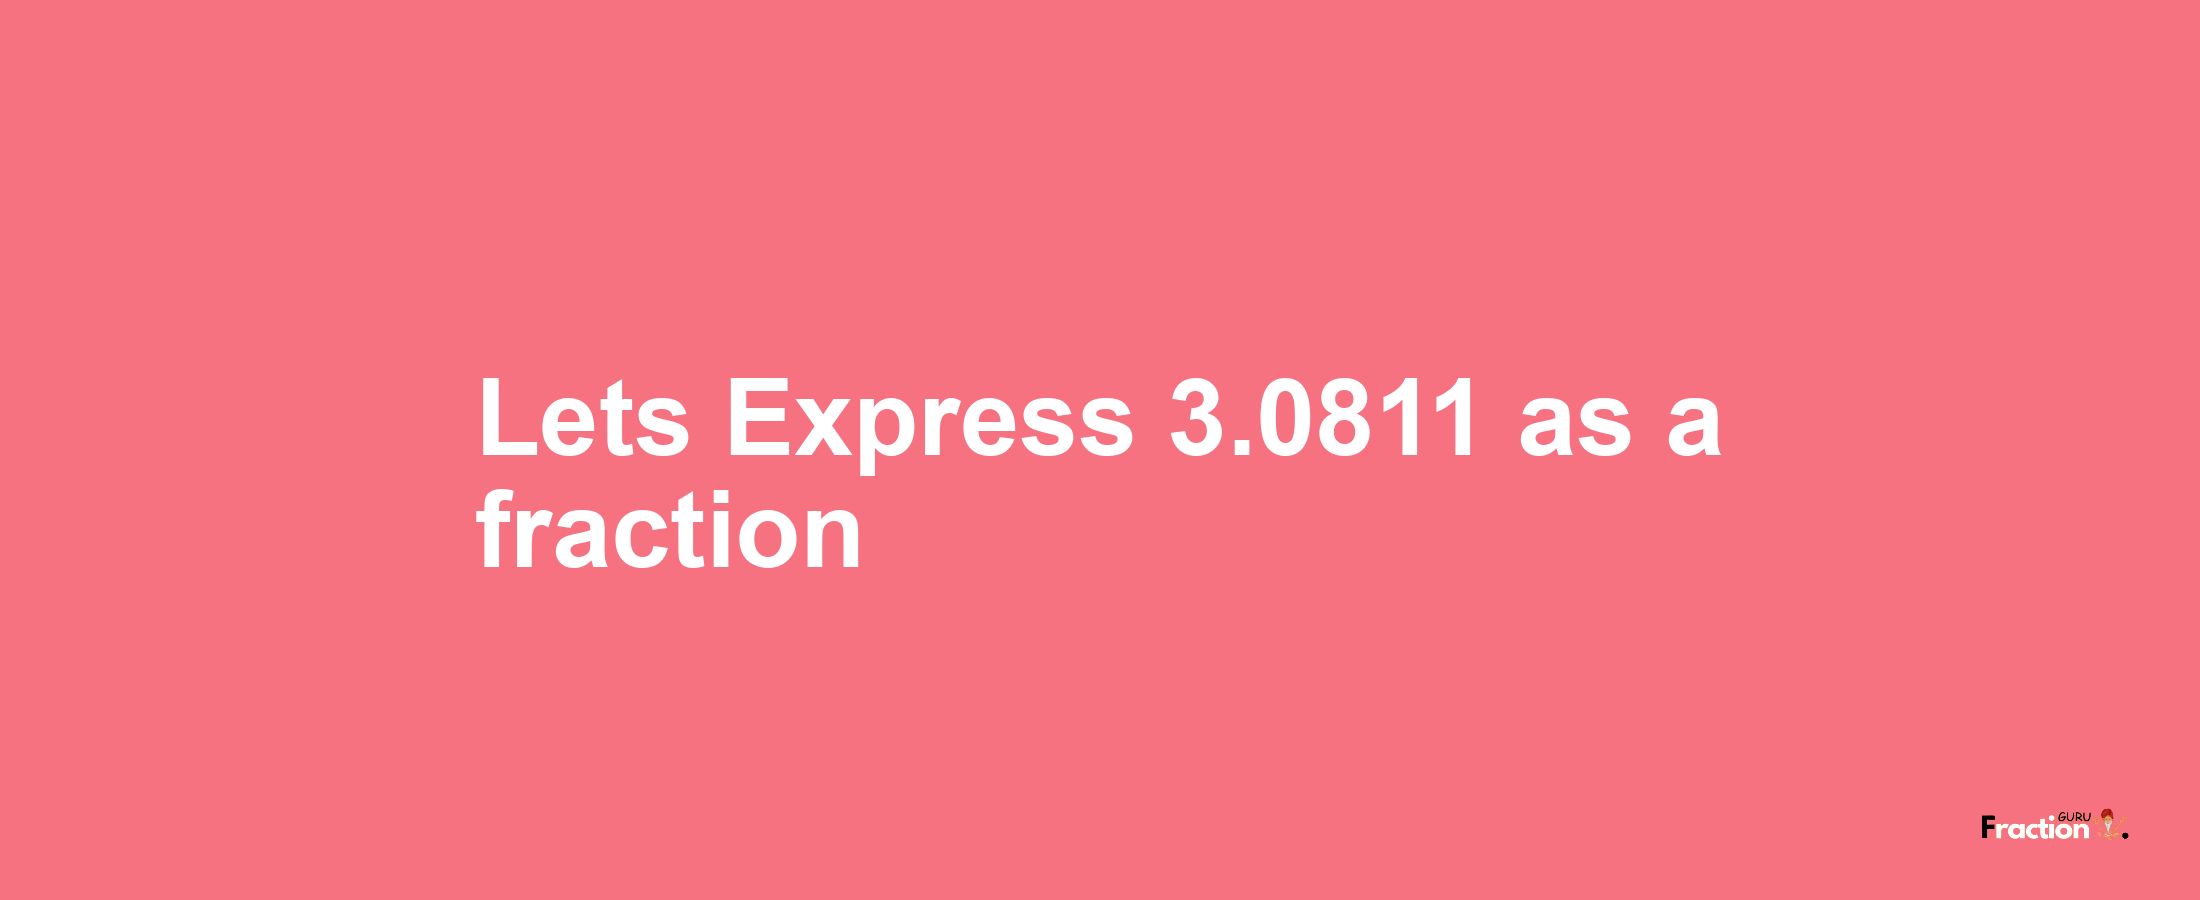 Lets Express 3.0811 as afraction